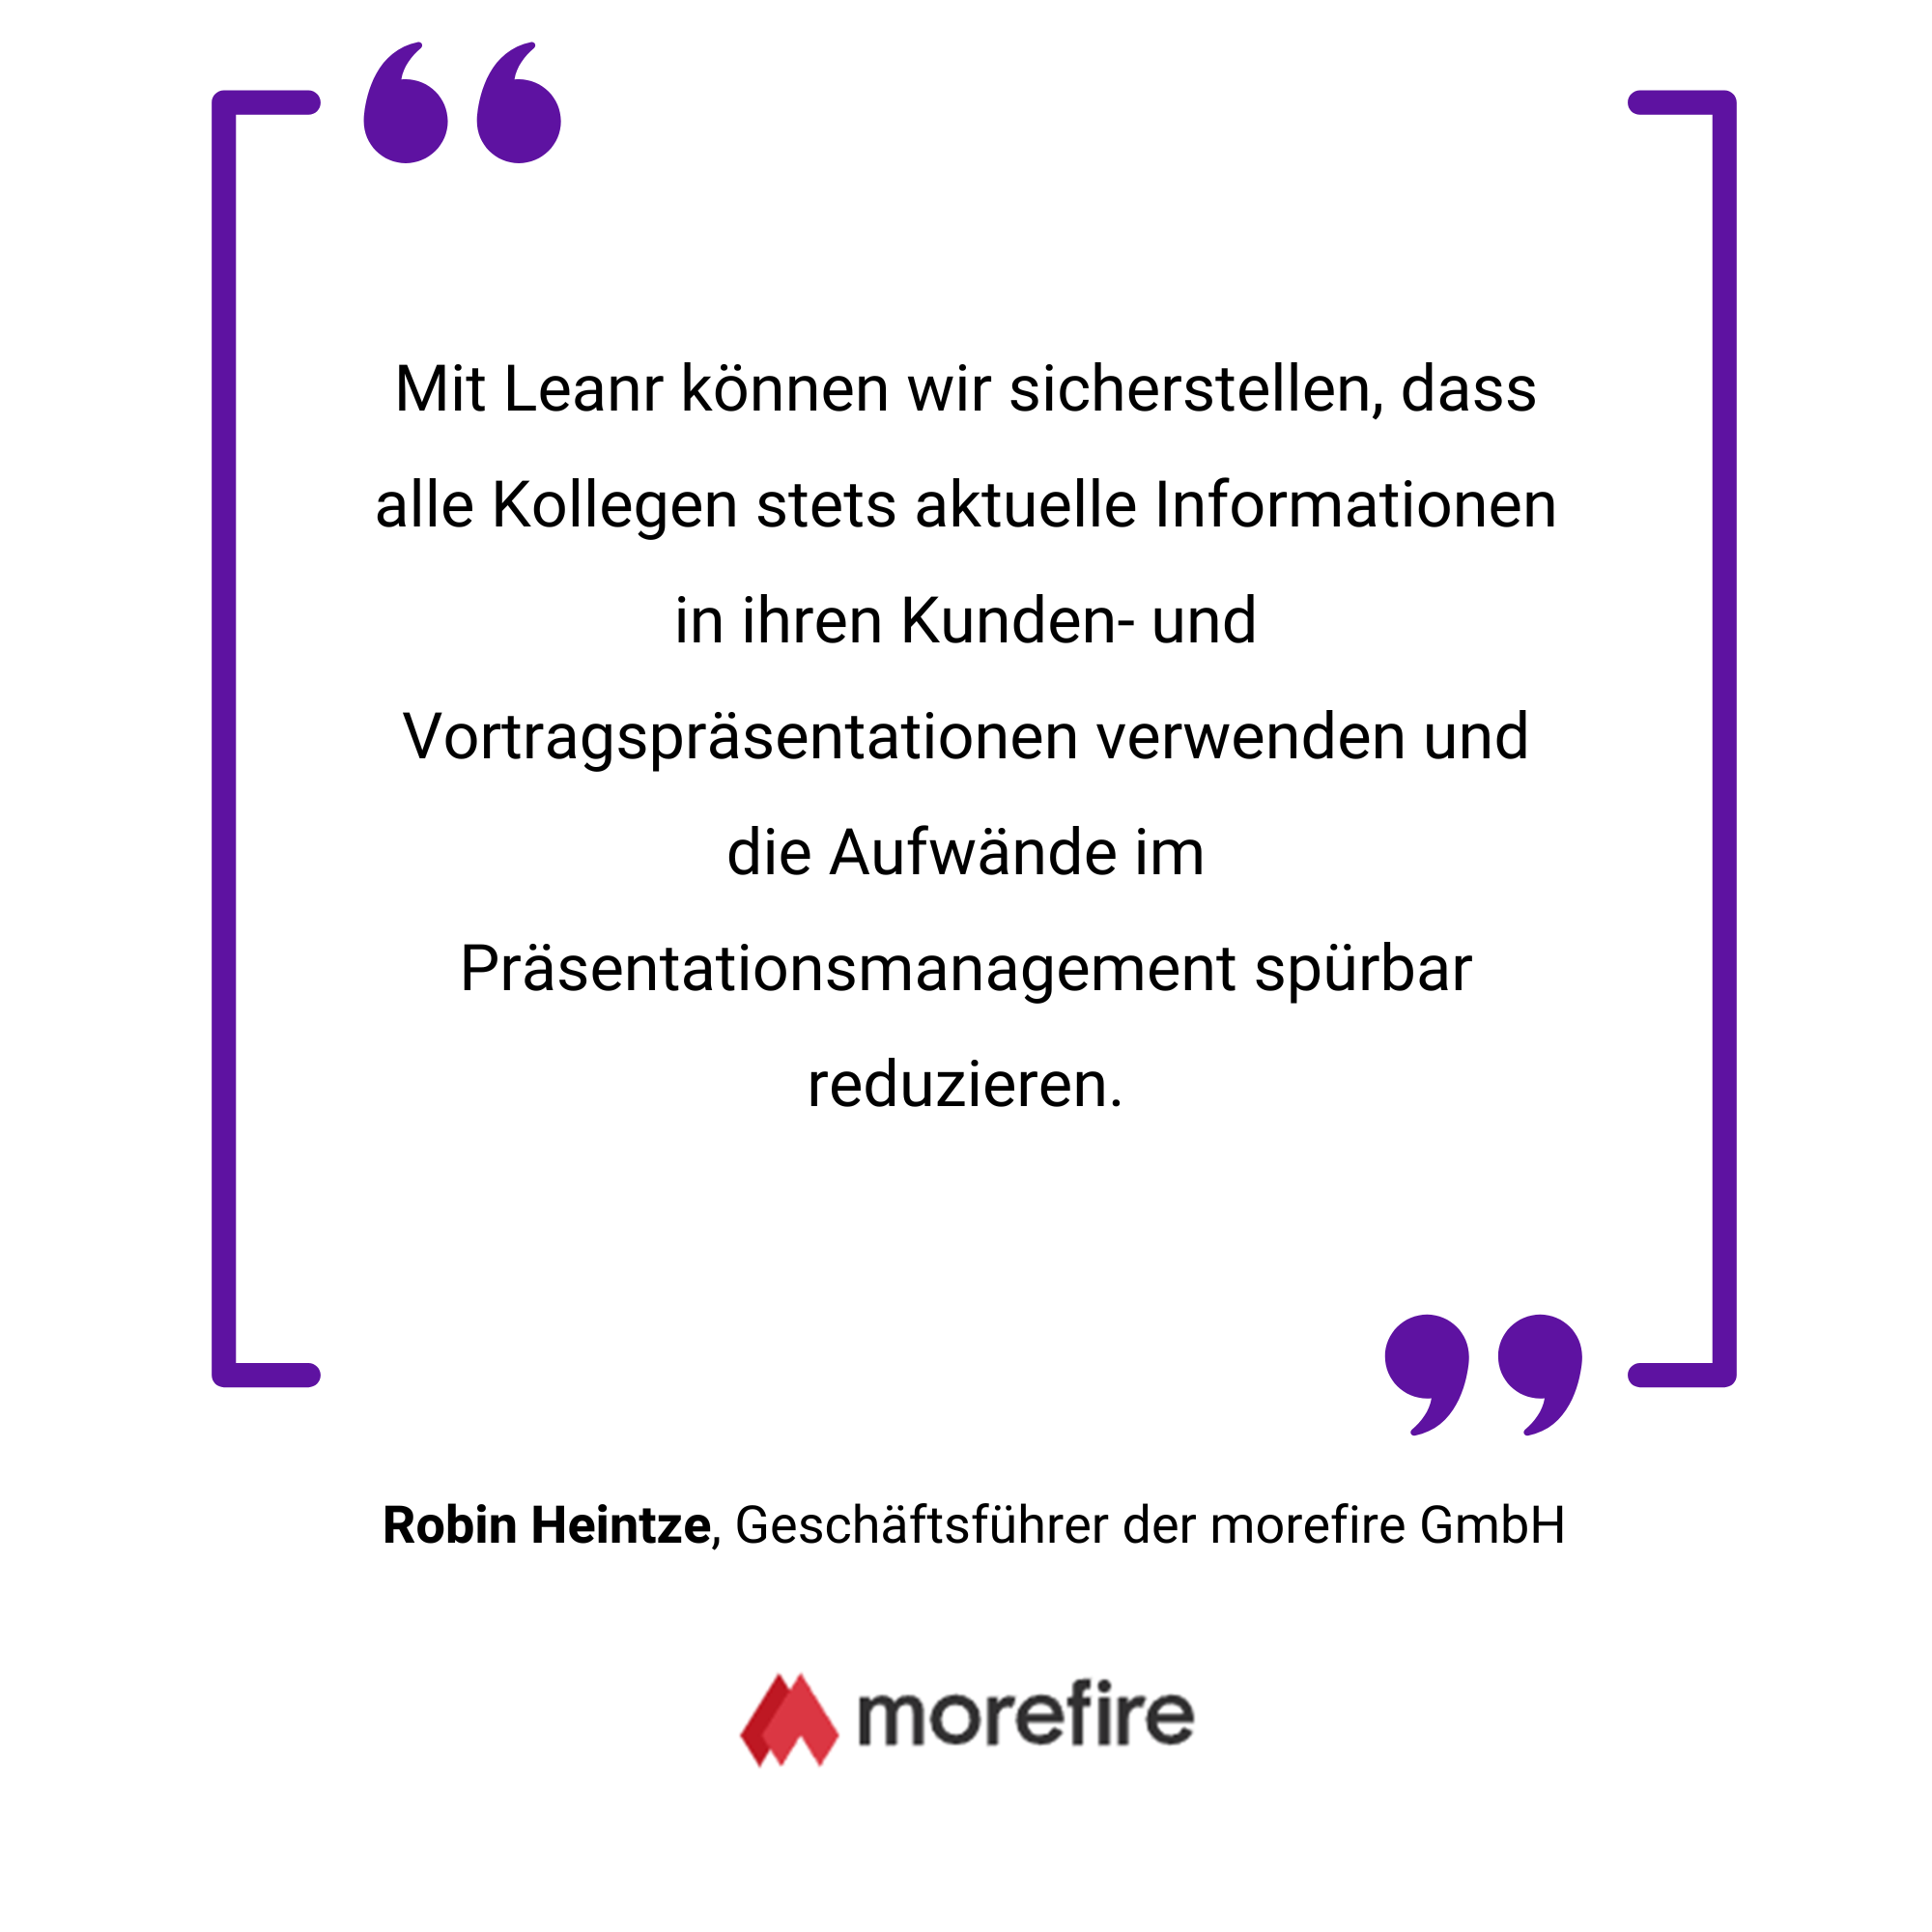 Purple-framed image featuring a quote in german about optimizing client presentations, attributed to robin heintz, ceo of morefire gmbh.